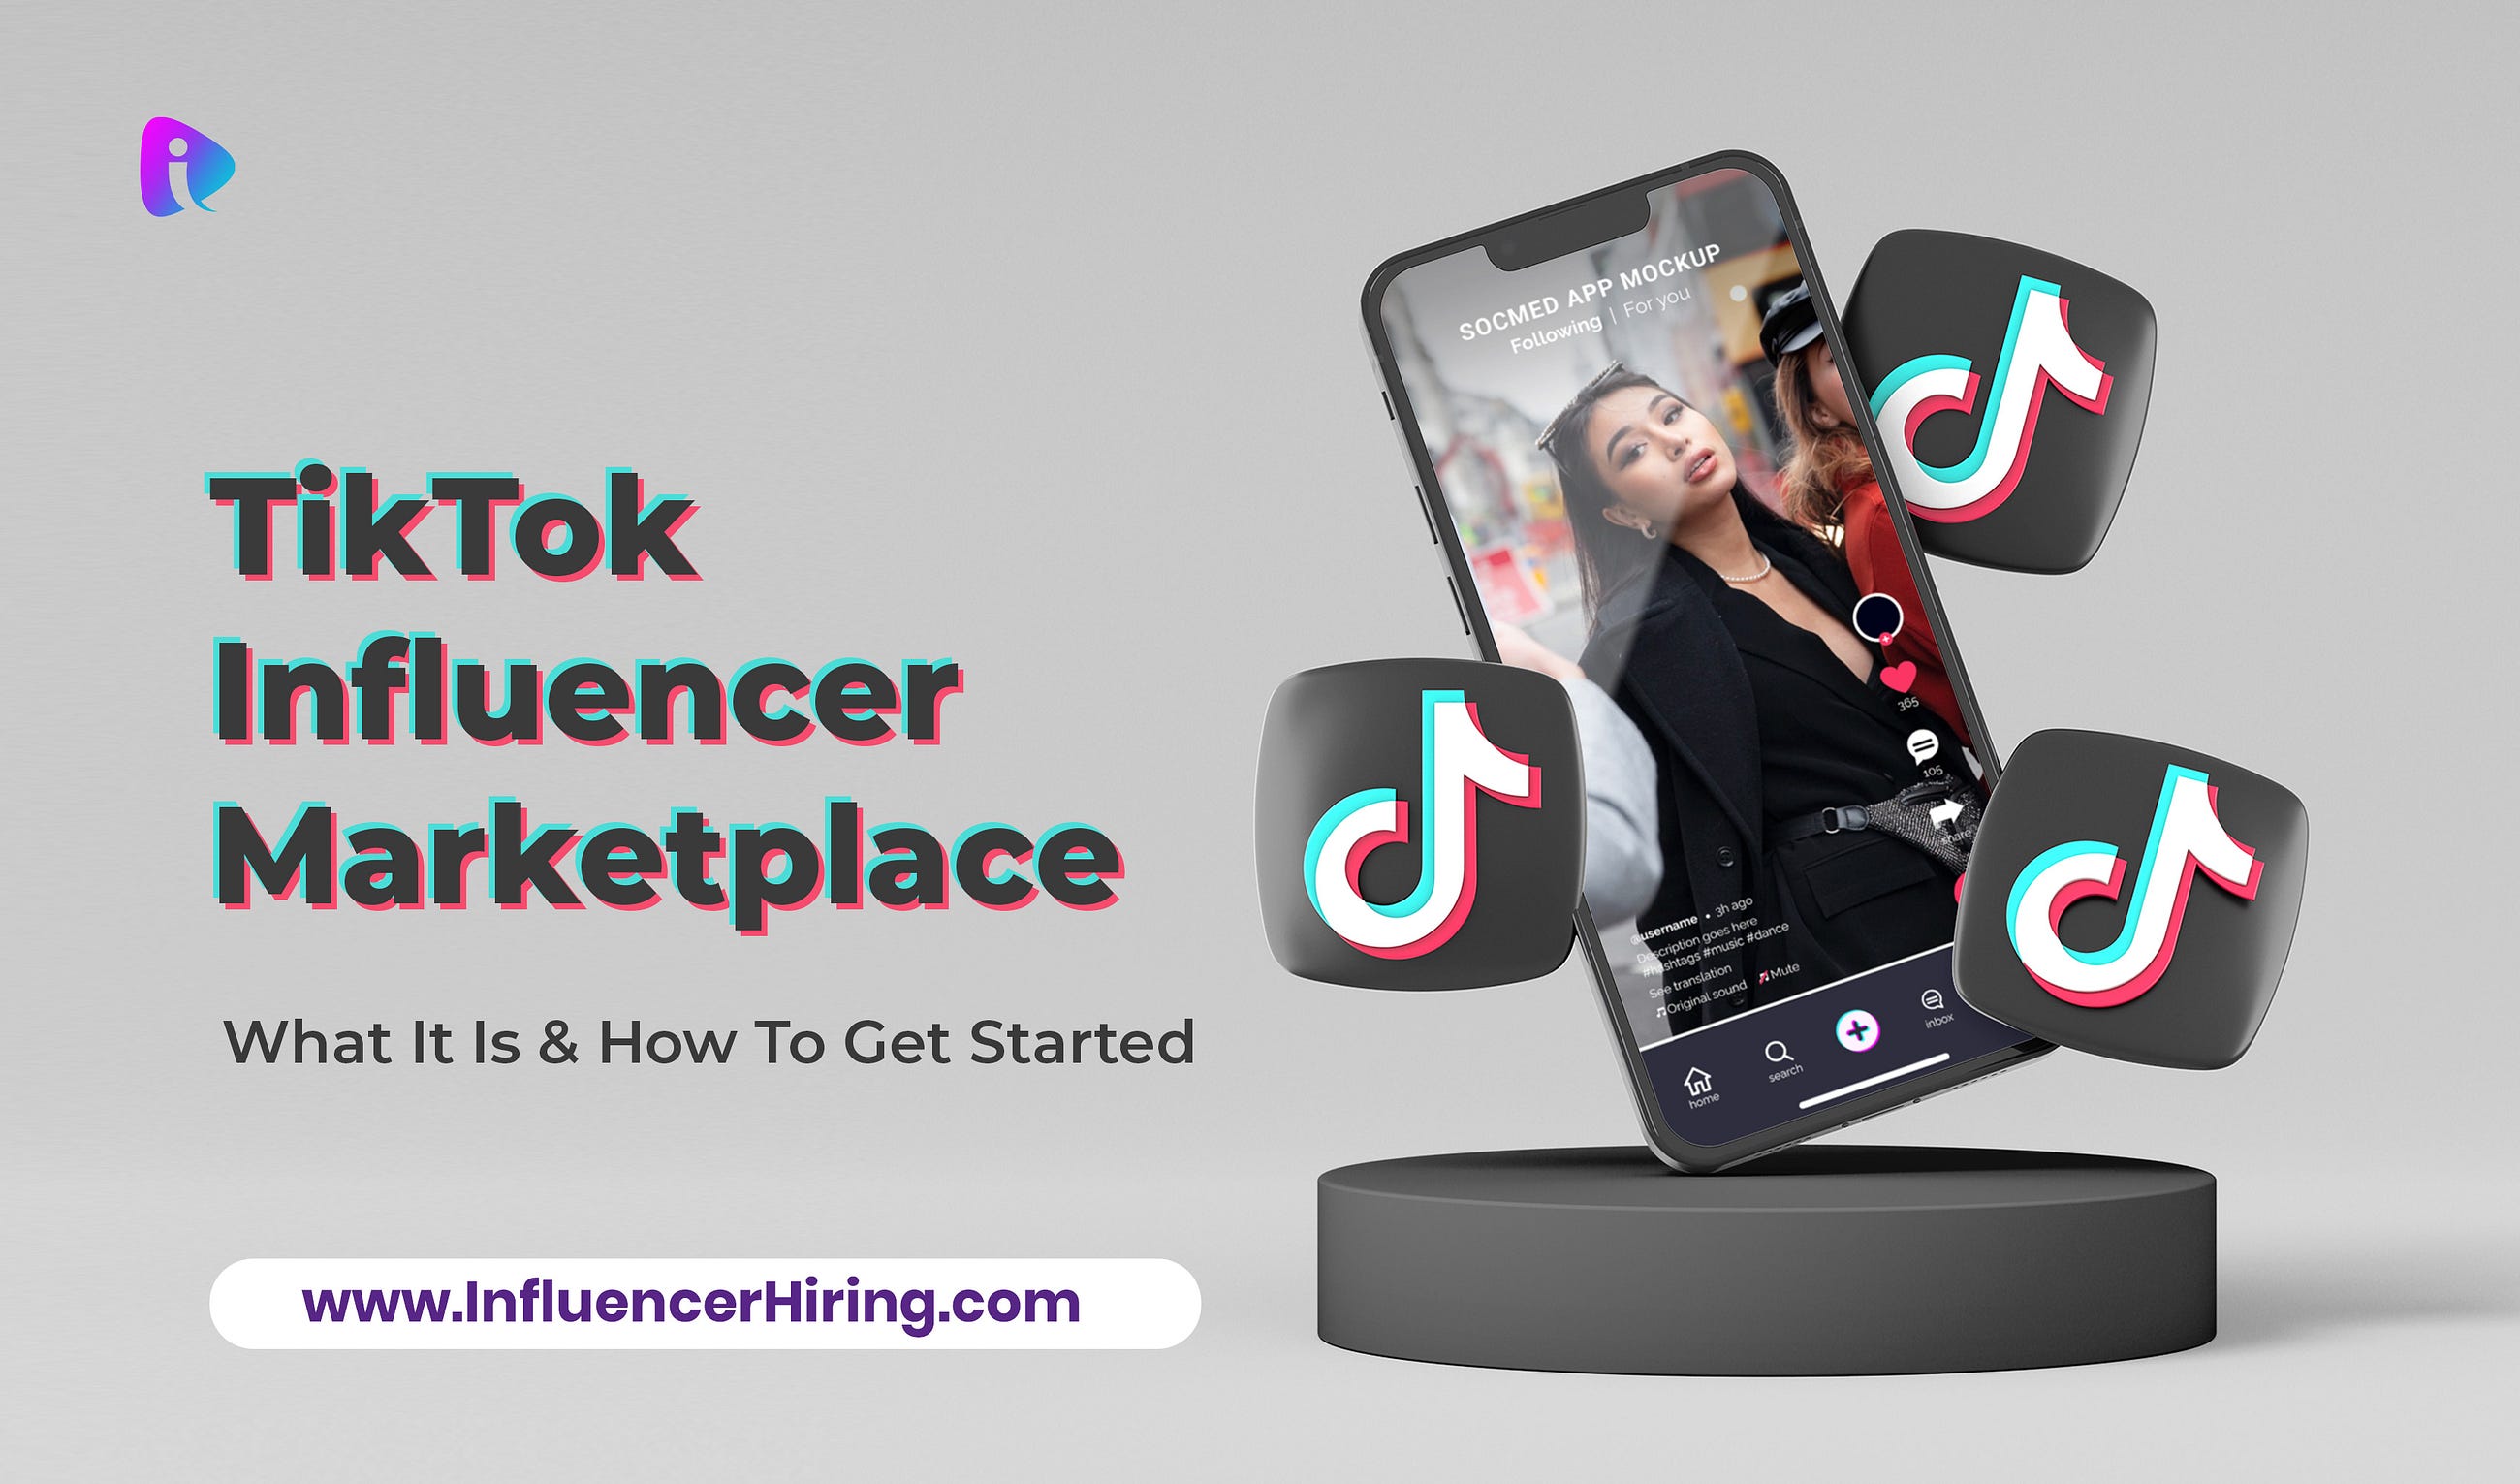 <div>TikTok Influencer Marketplace: What It Is & How To Get Started</div>